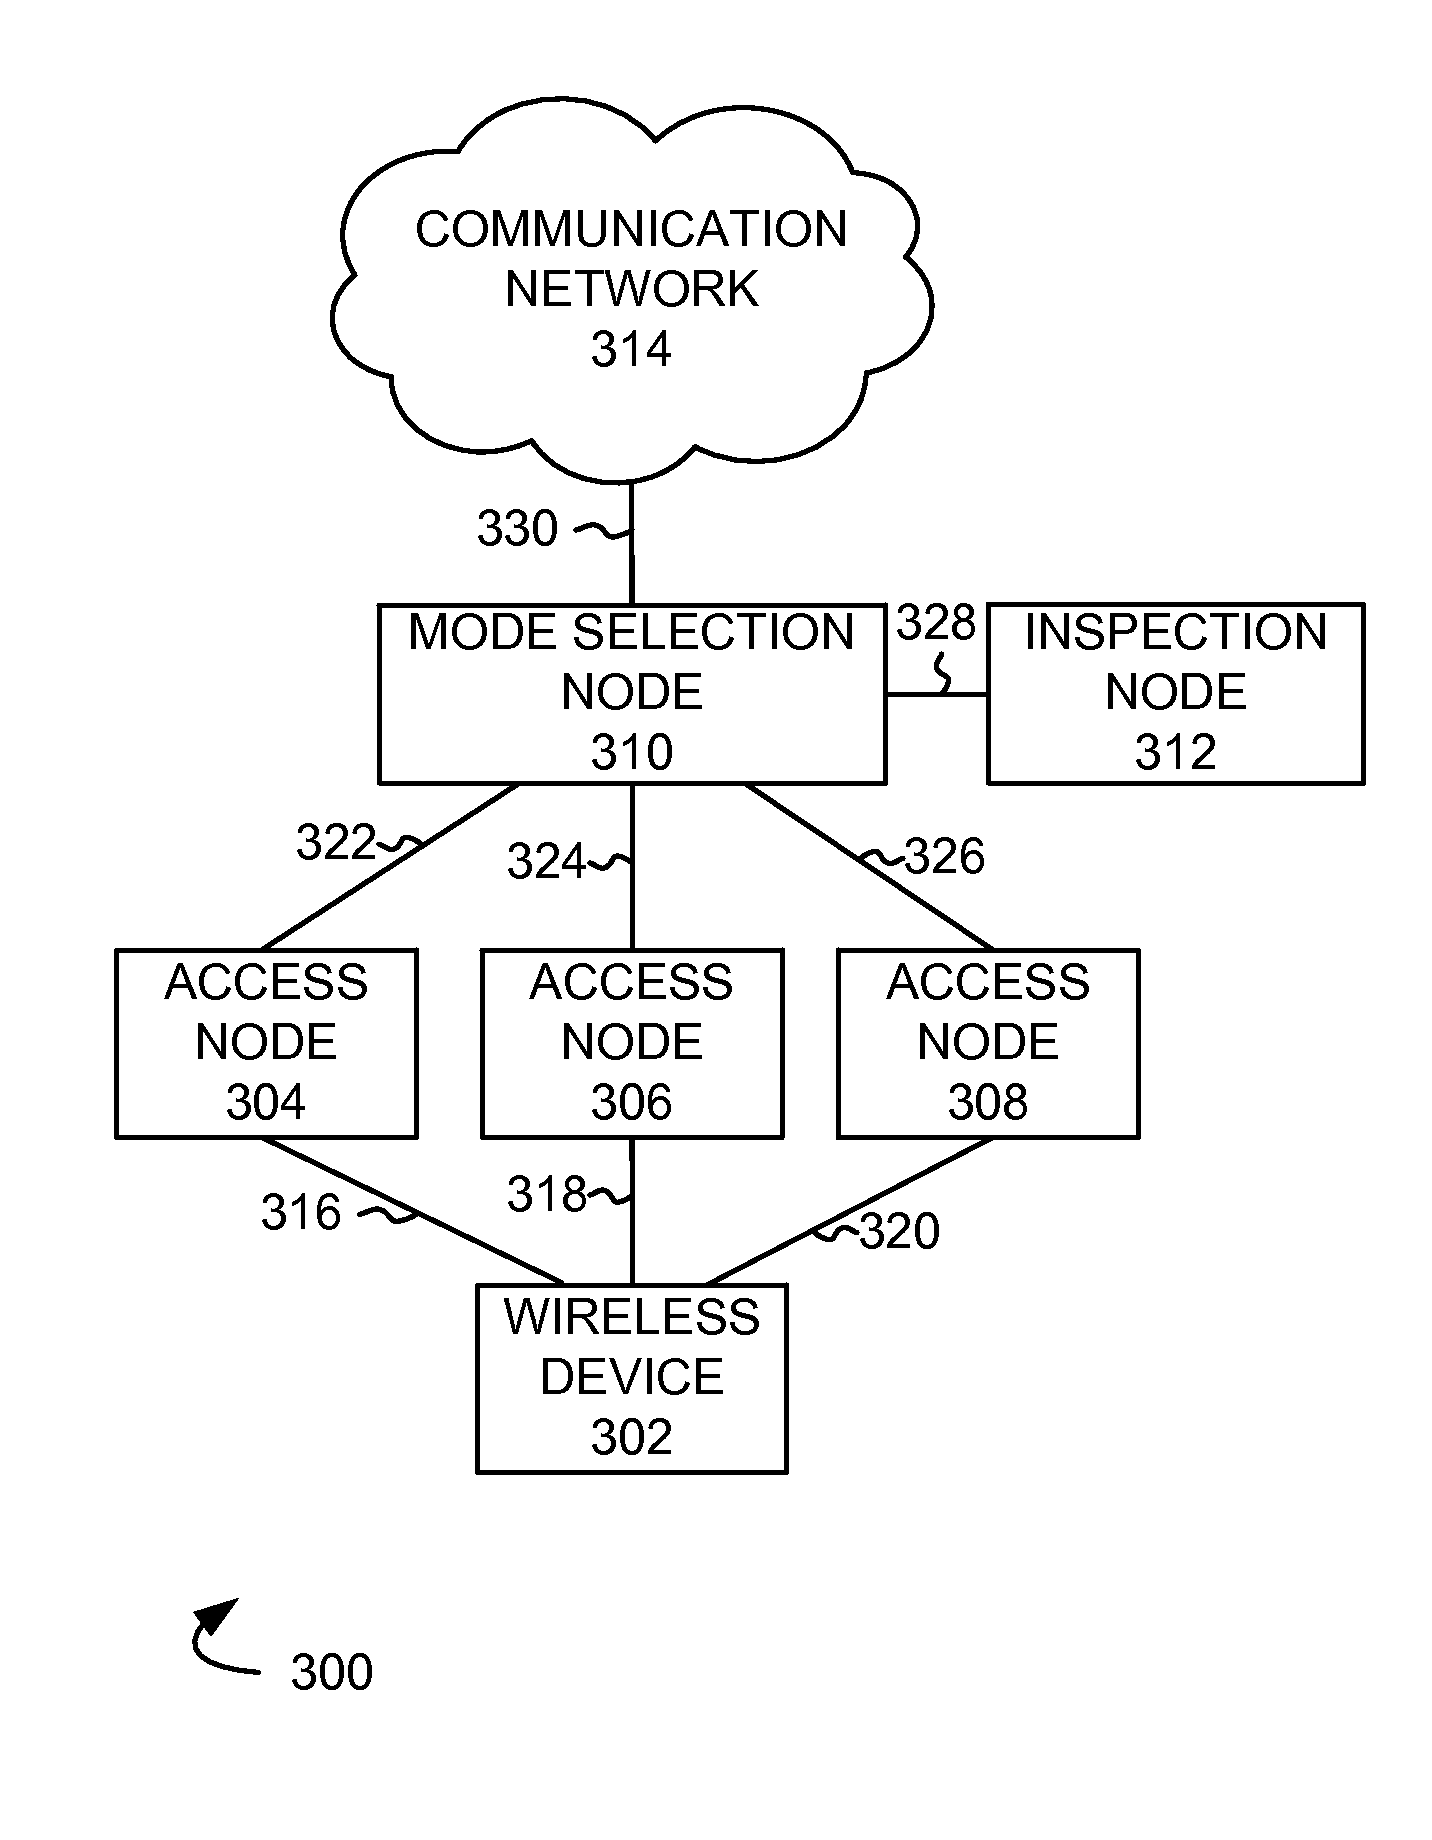 Multi-band communication with a wireless device